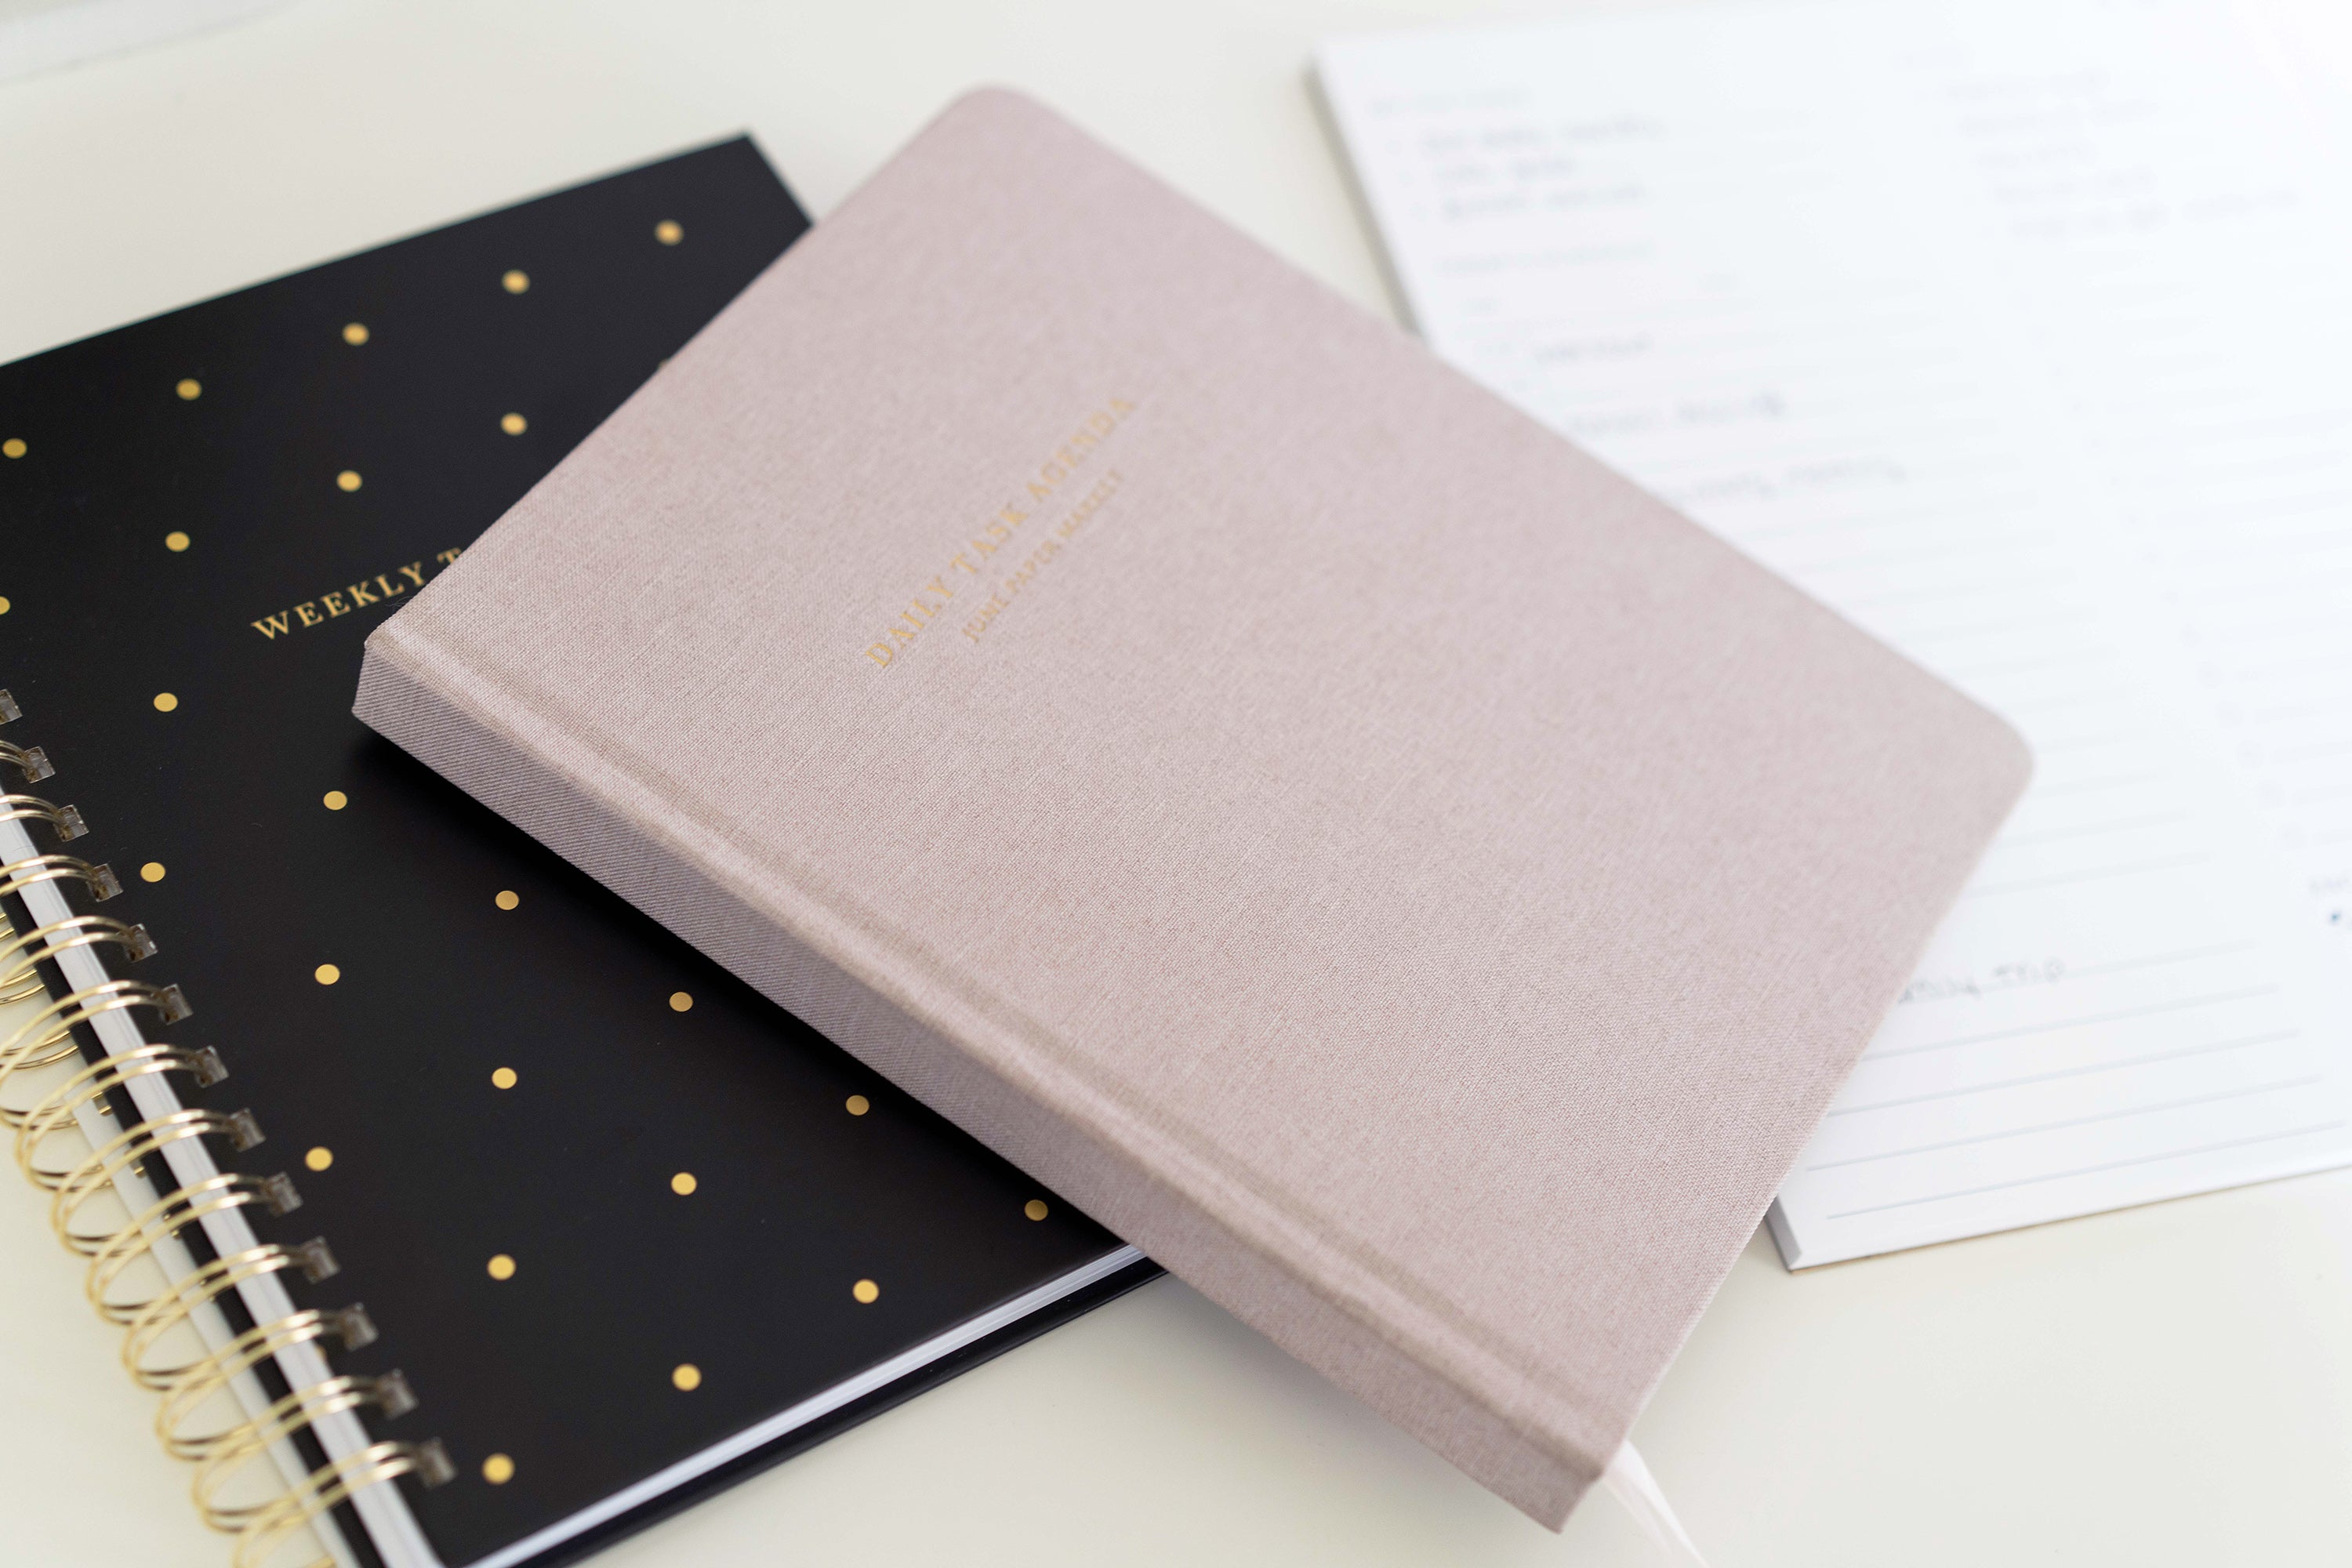 The Complete Guide To Picking the Right Planner